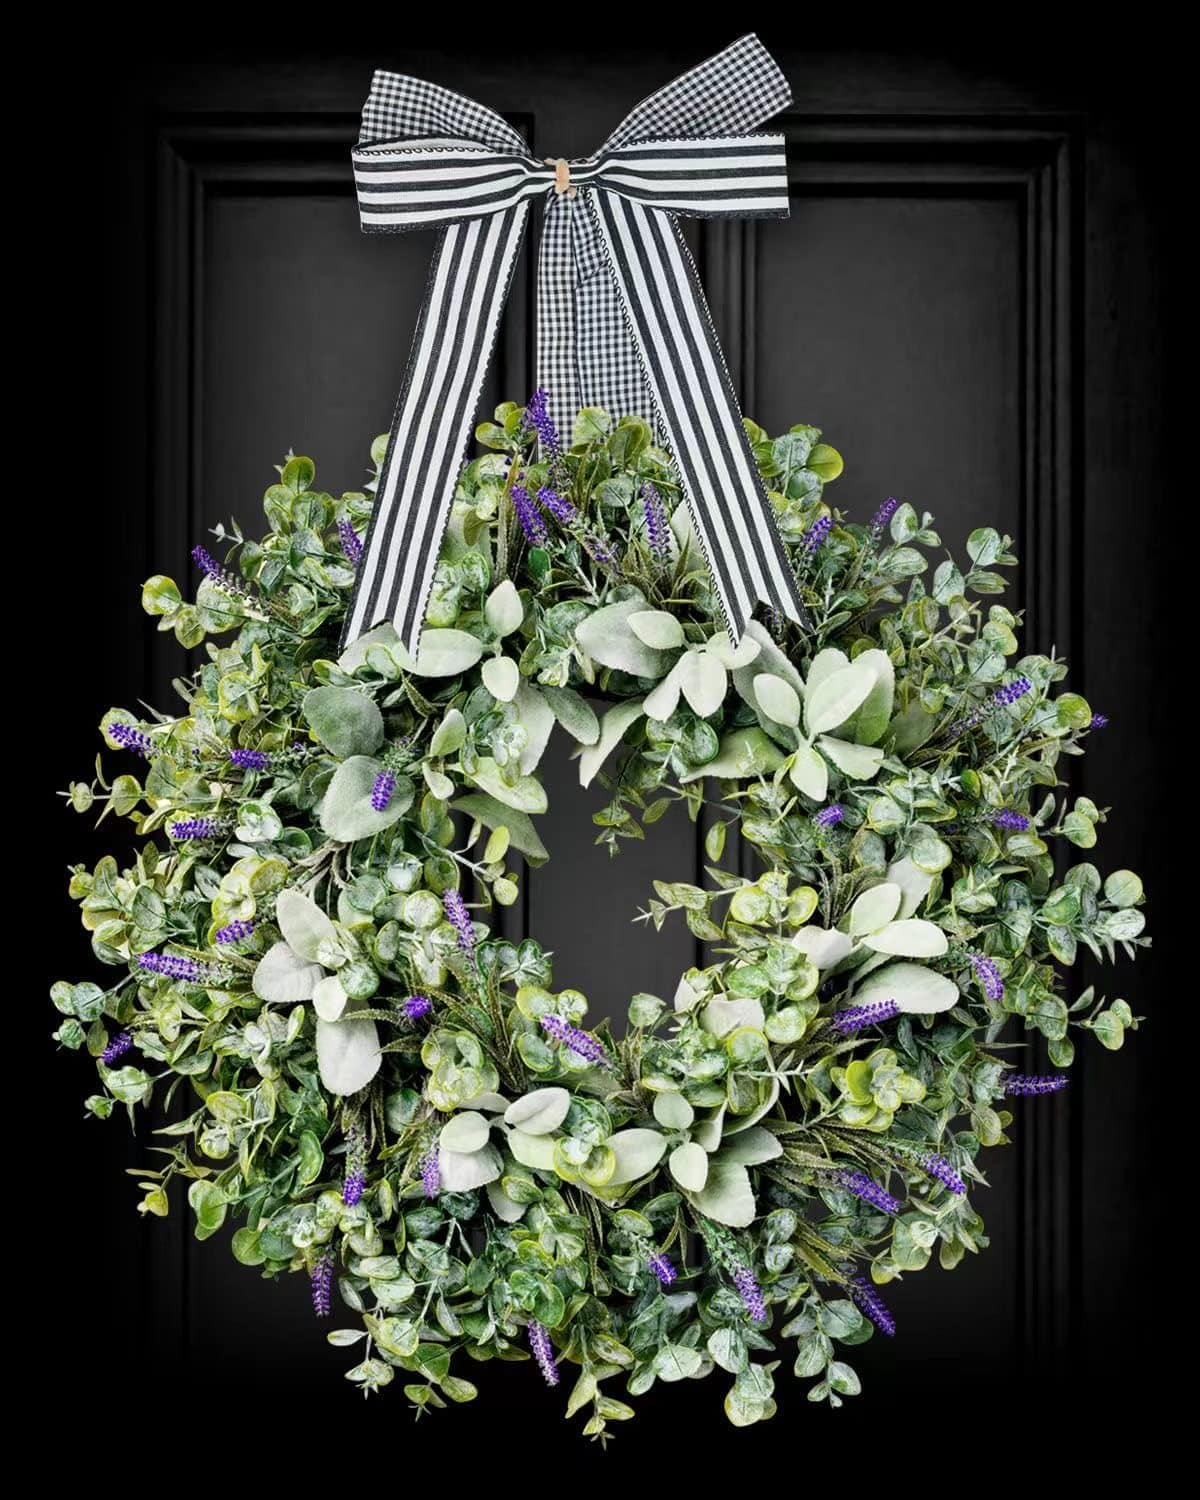 elegant wreath idea against a black front door with white and black stripped ribbon